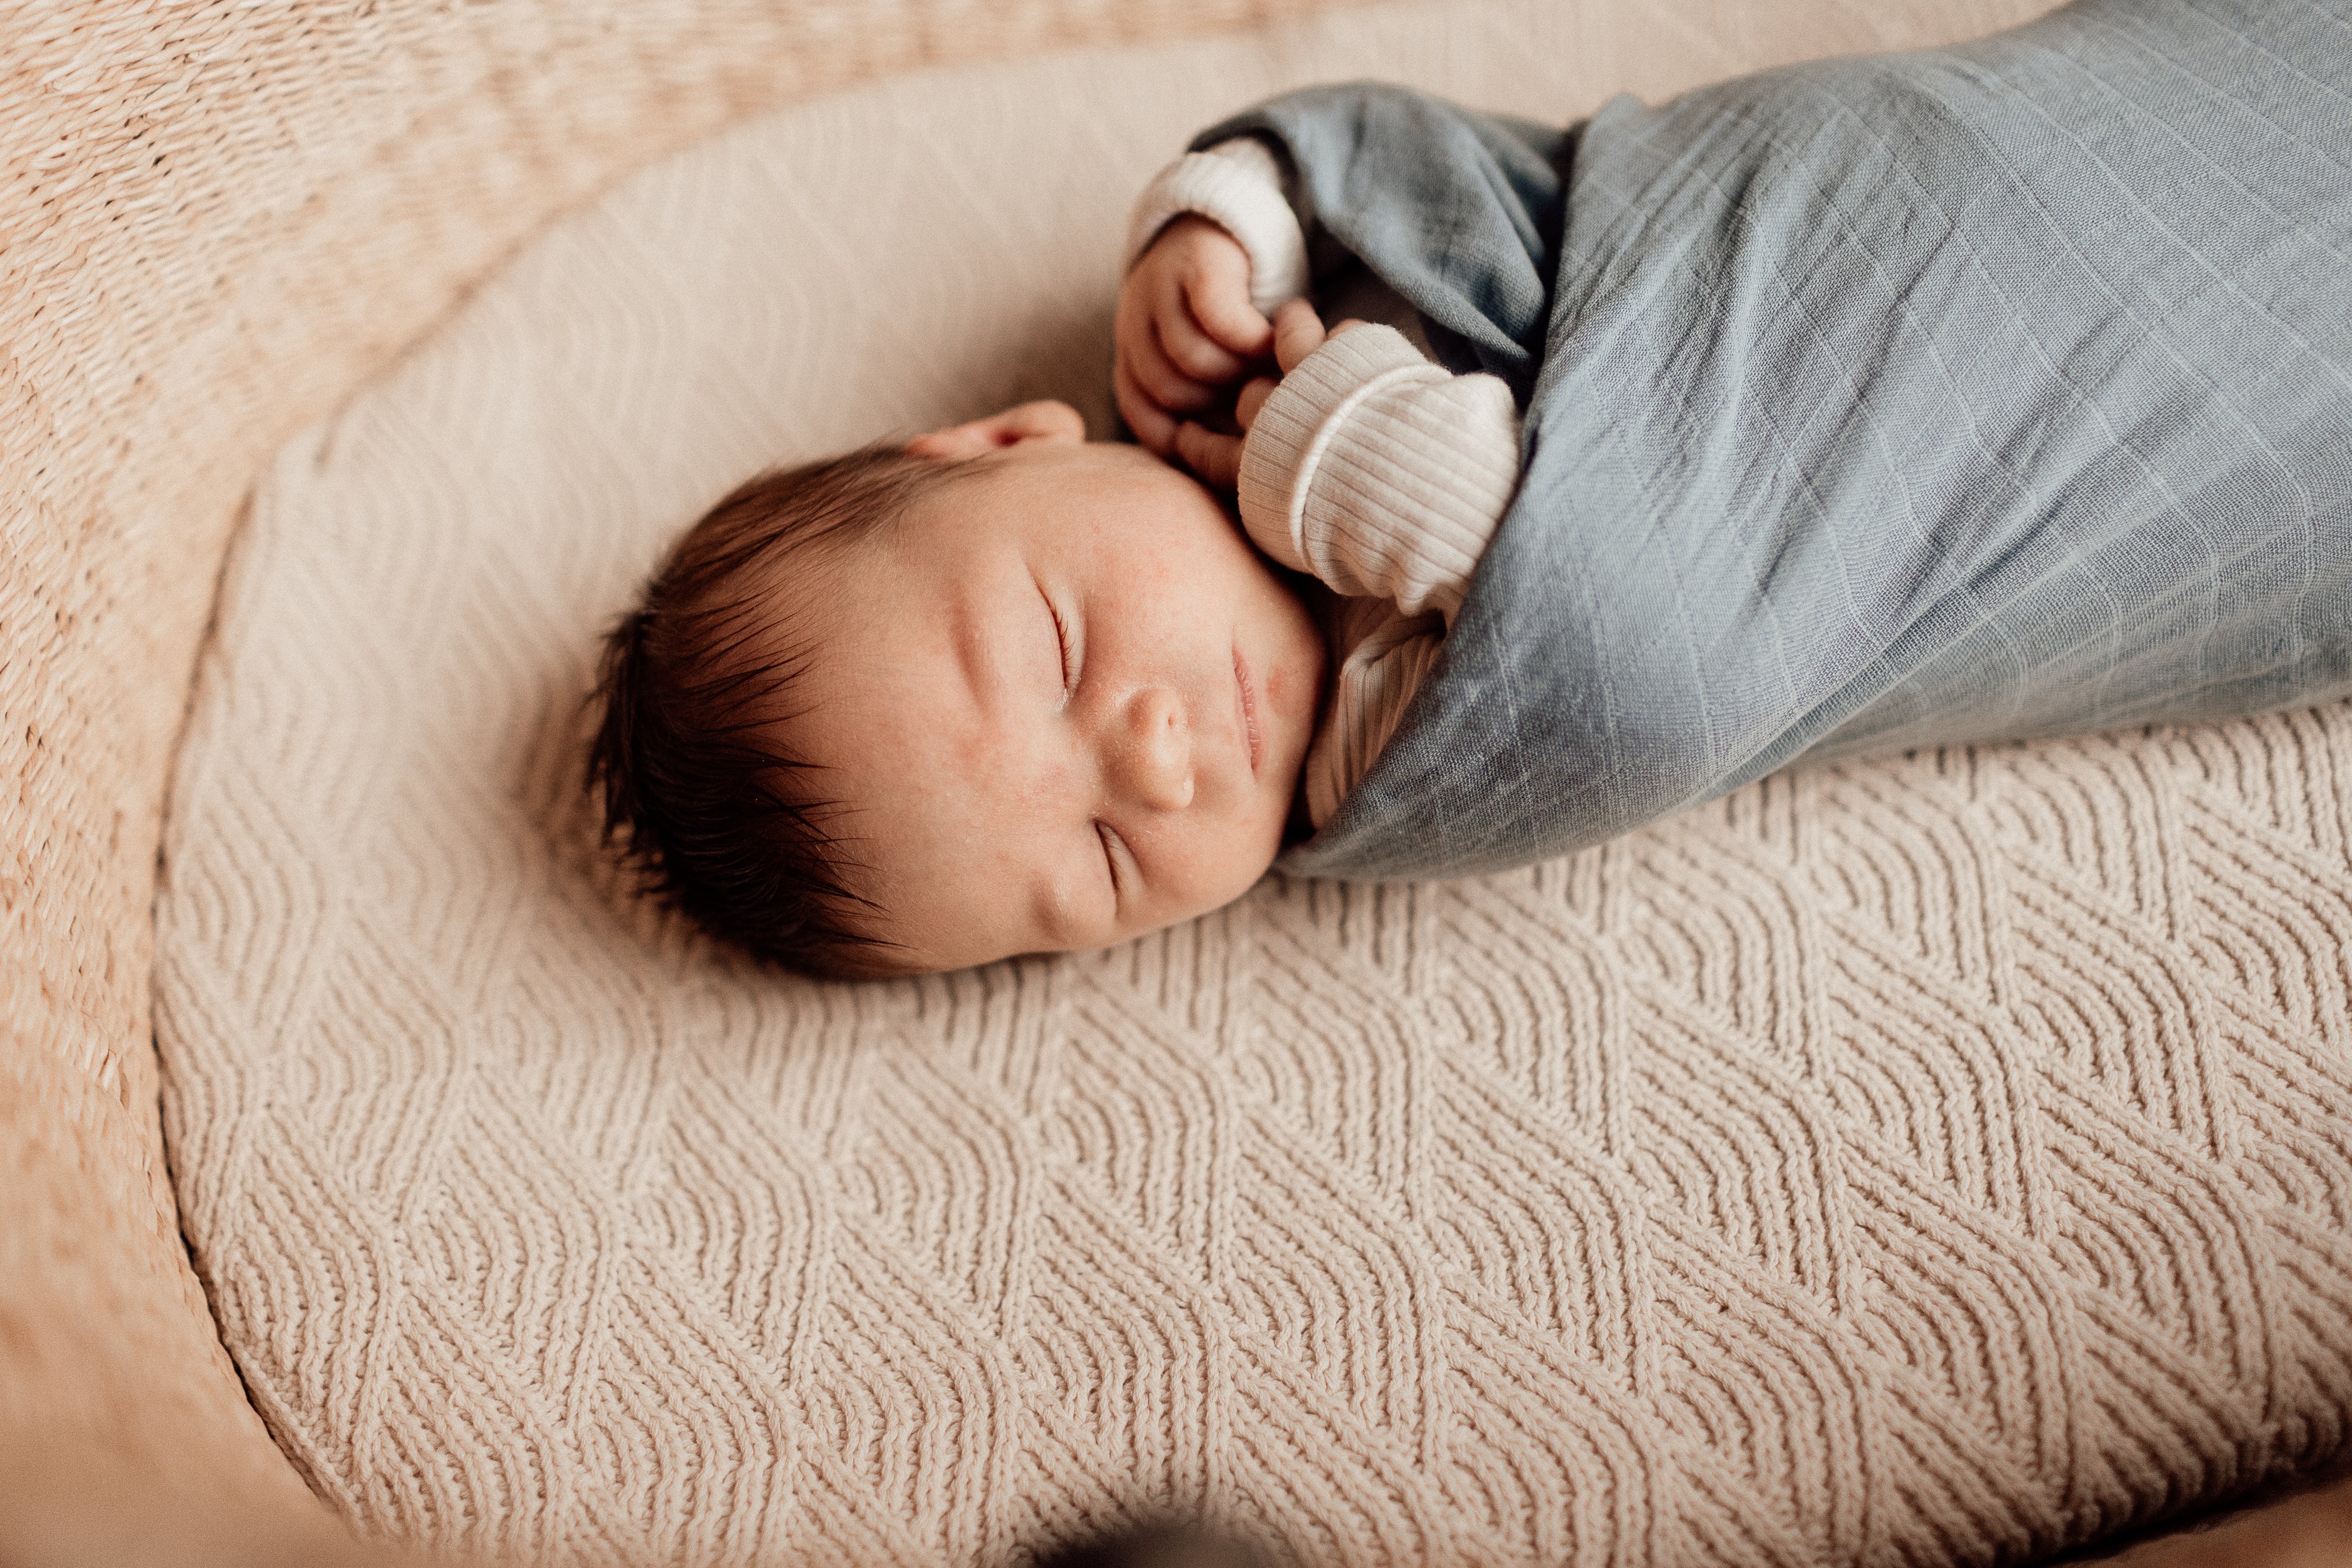 The Essential Swaddle Range | Chambray